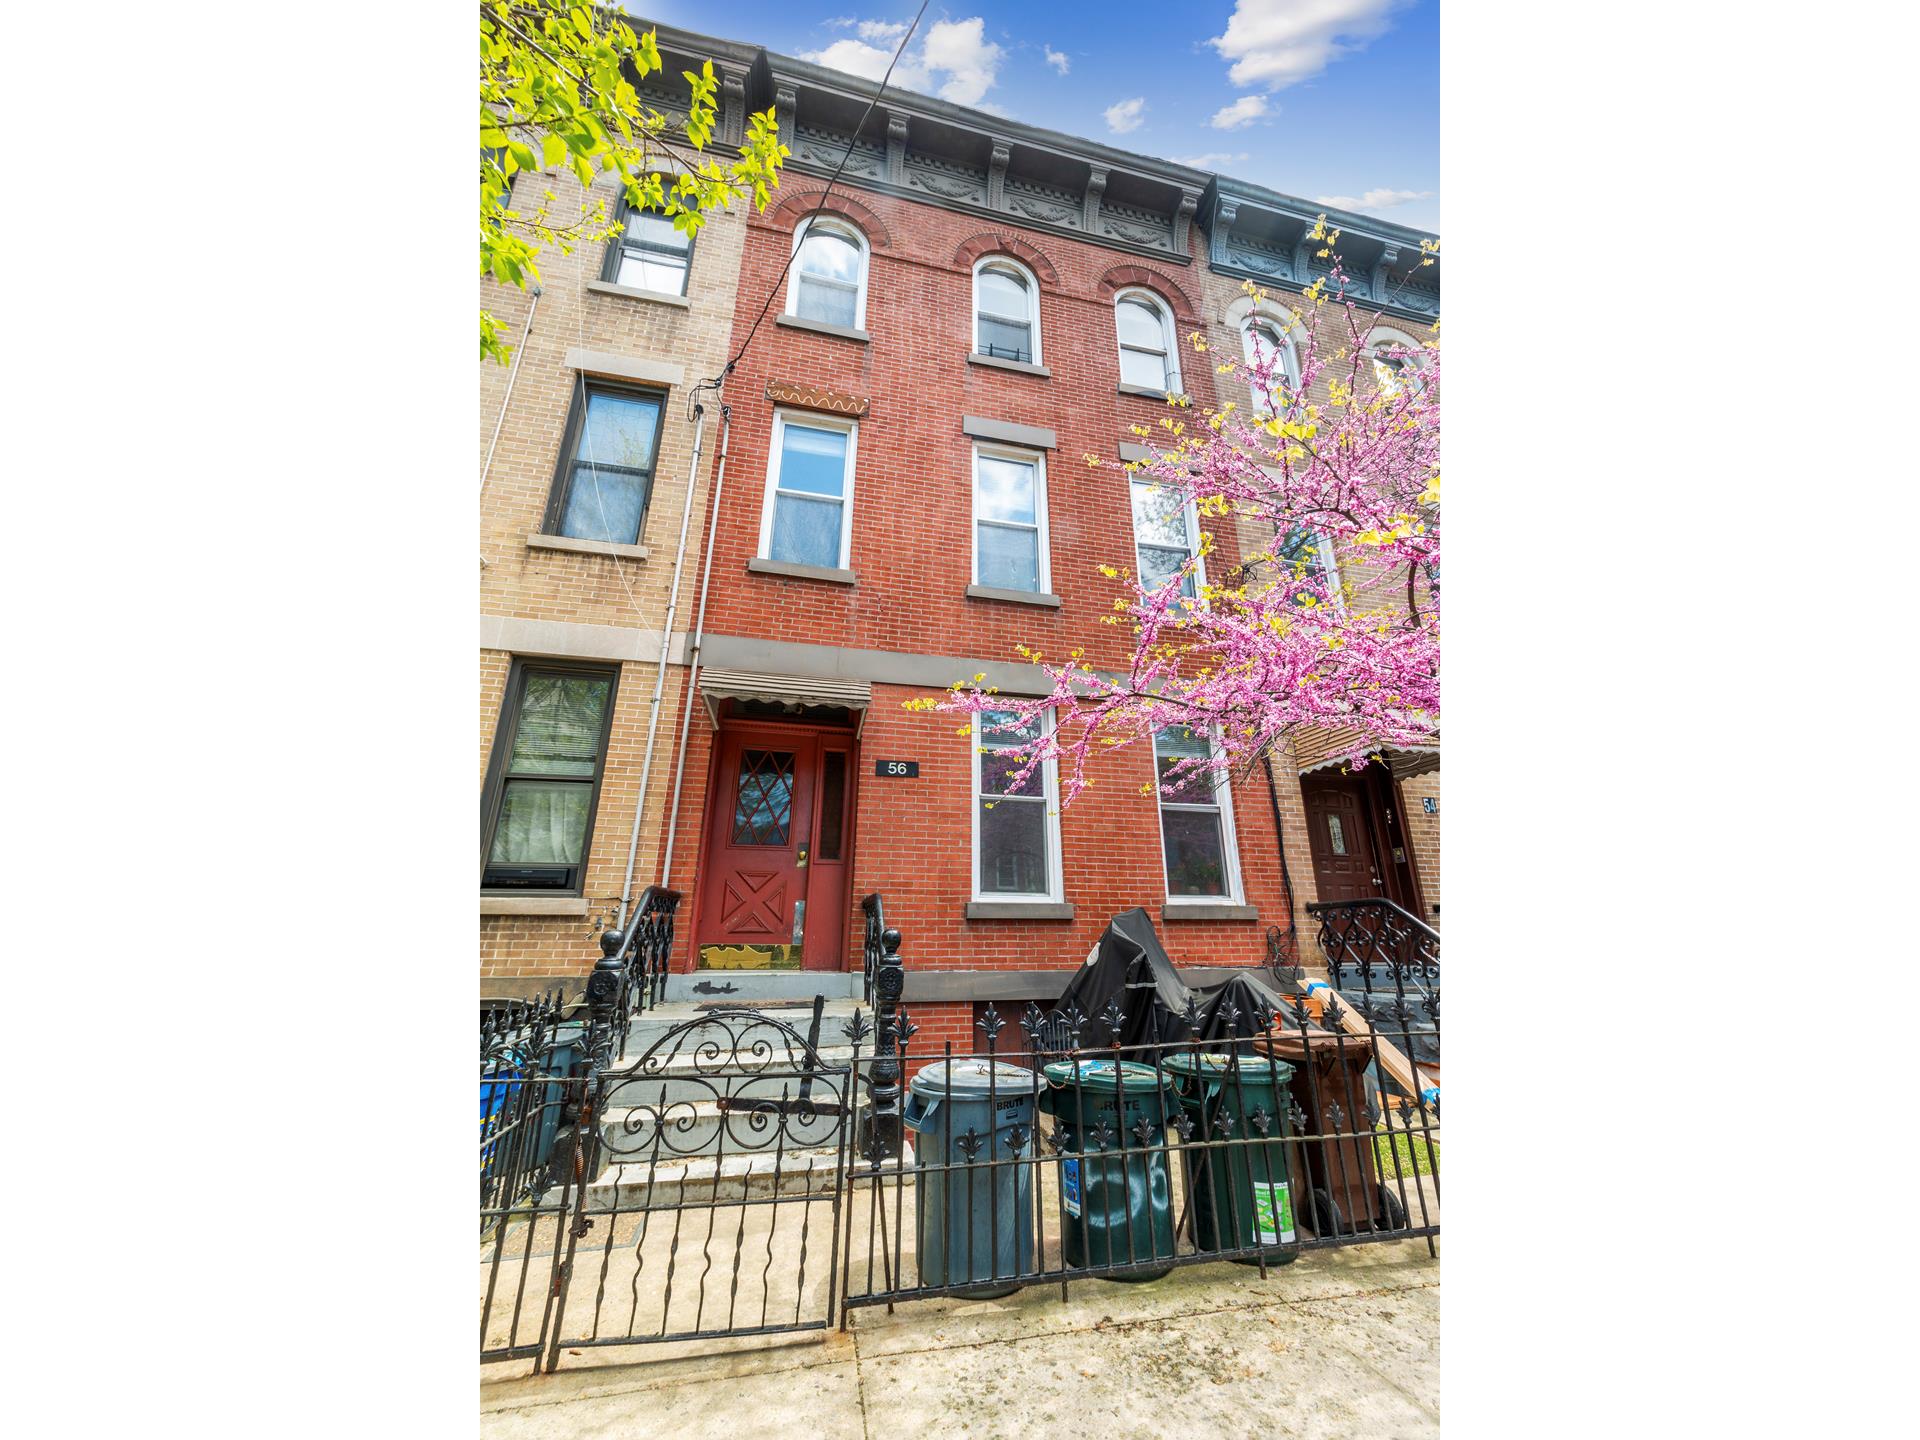 56 Sutton Street, Greenpoint, Brooklyn, New York - 3 Bedrooms  
3 Bathrooms  
11 Rooms - 